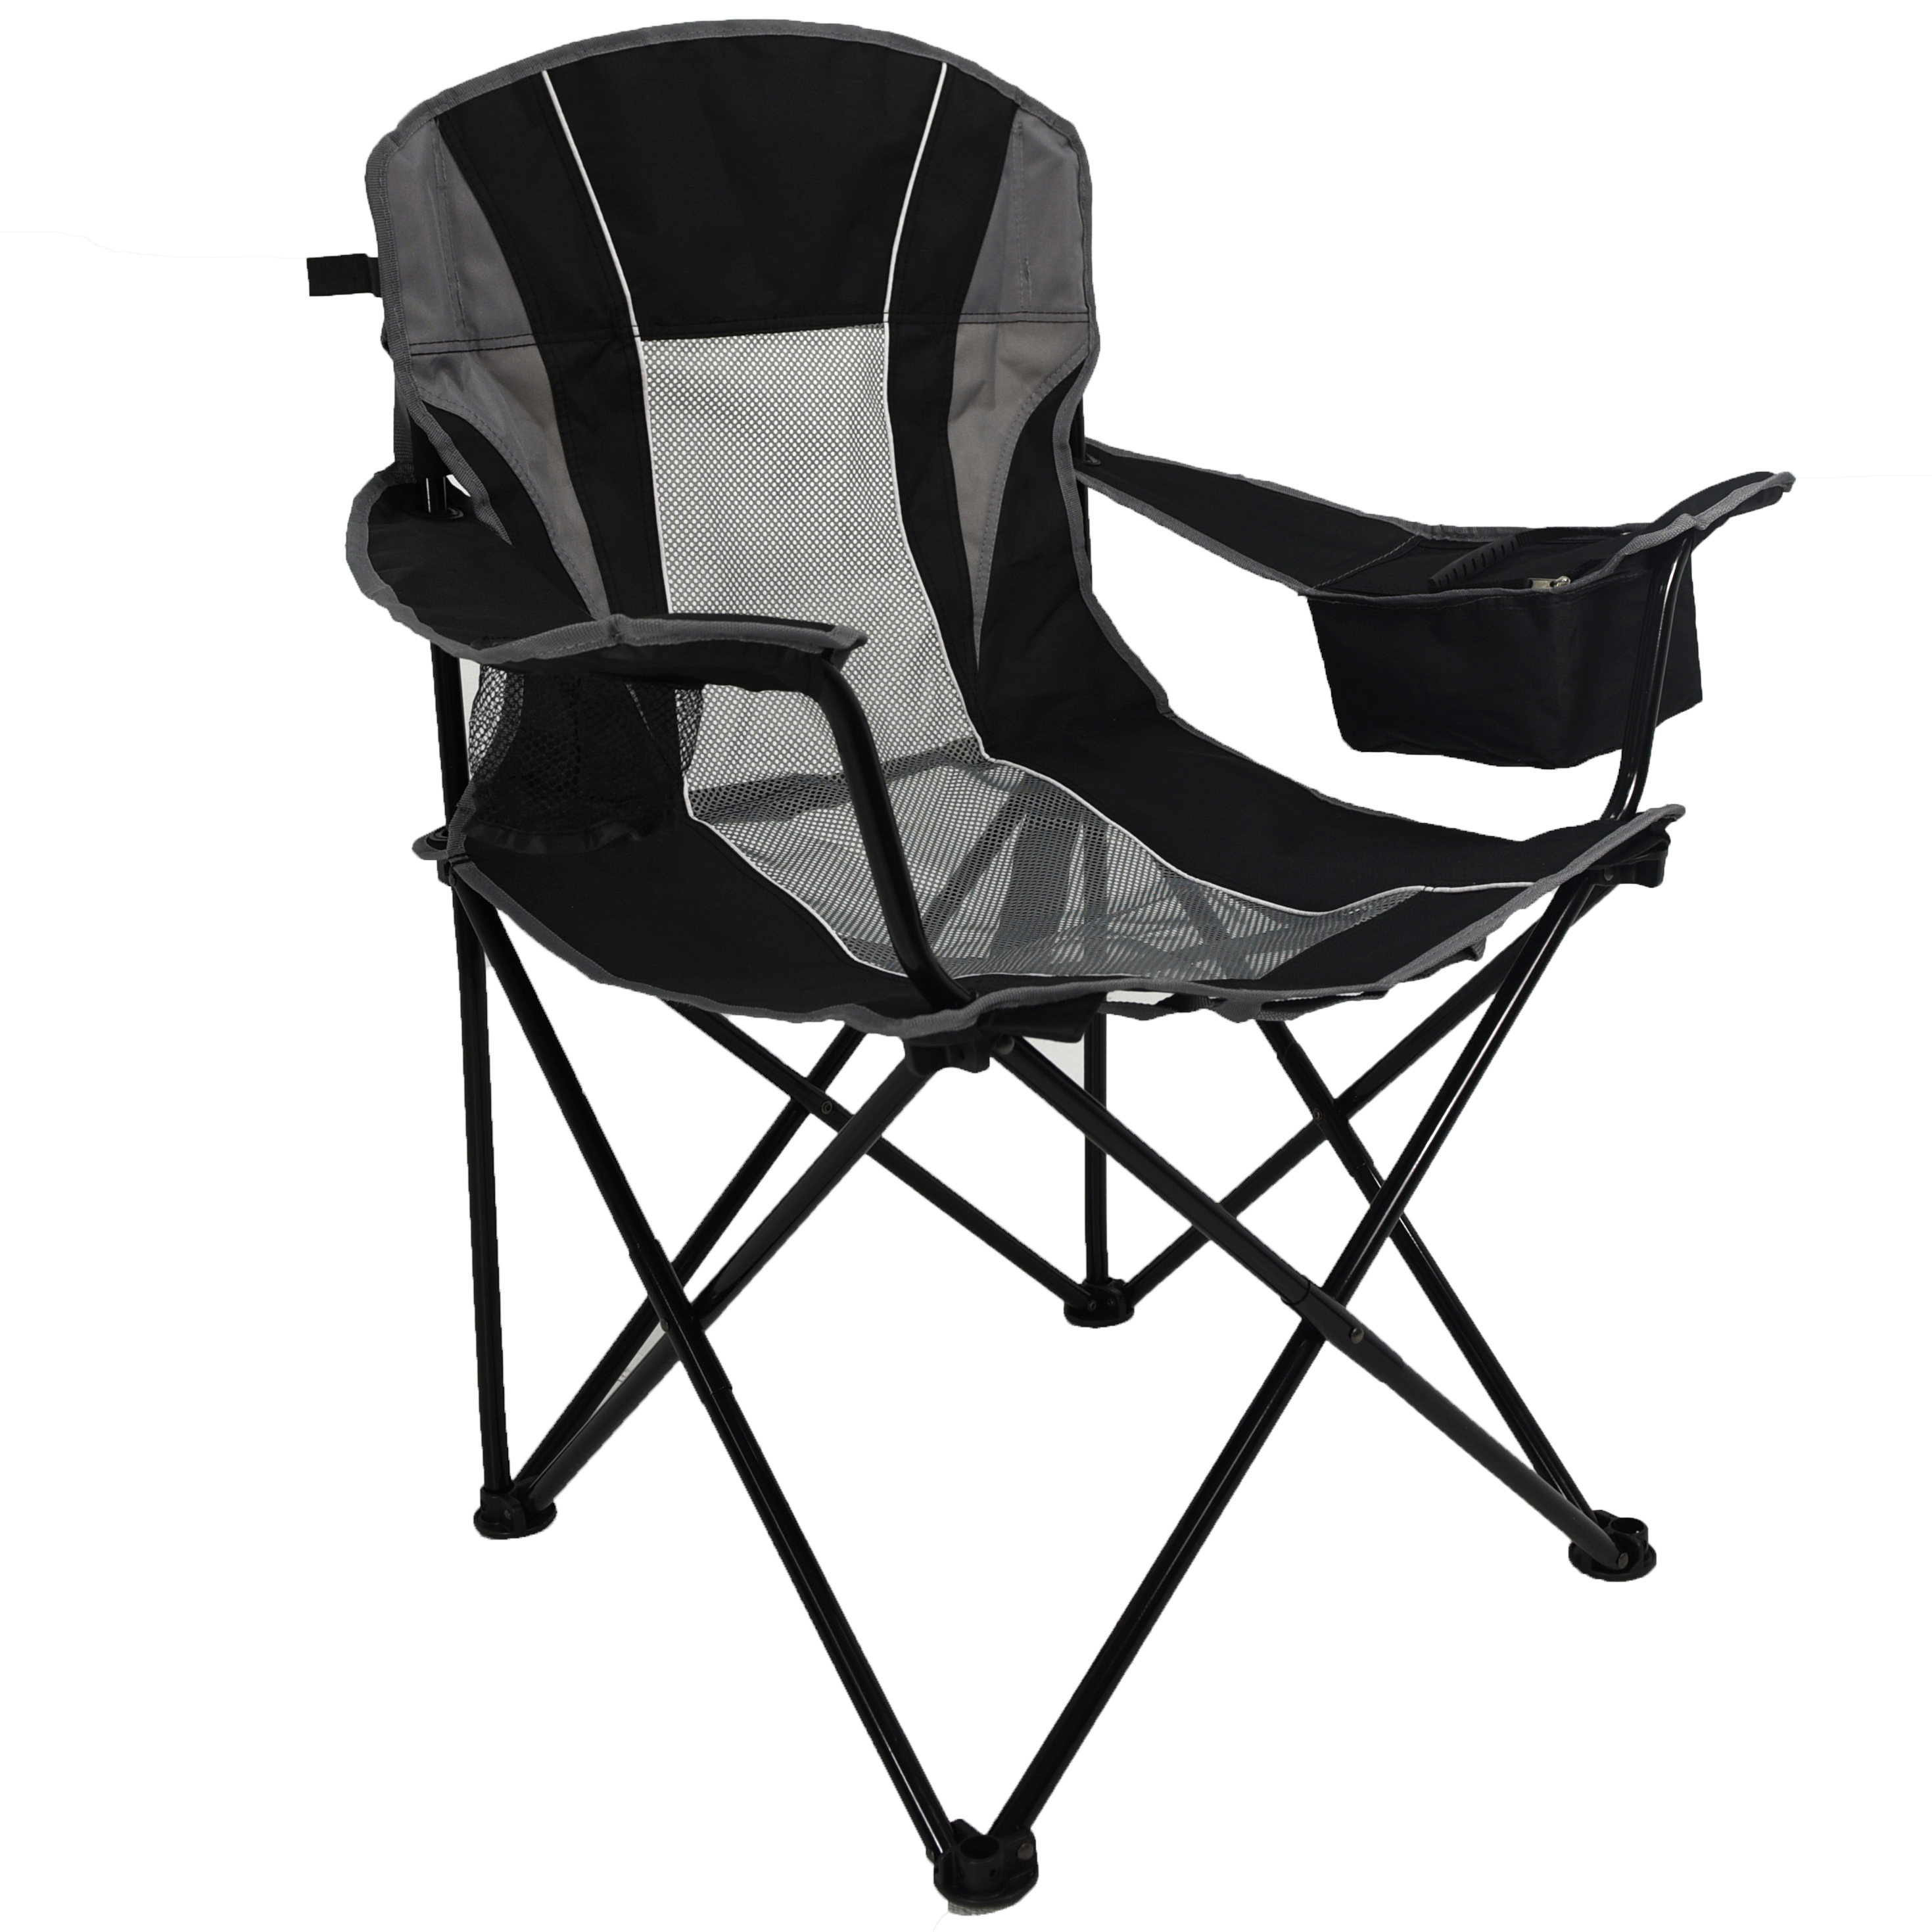 Ozark Trail Camping Chair, Black and Gray - image 2 of 9